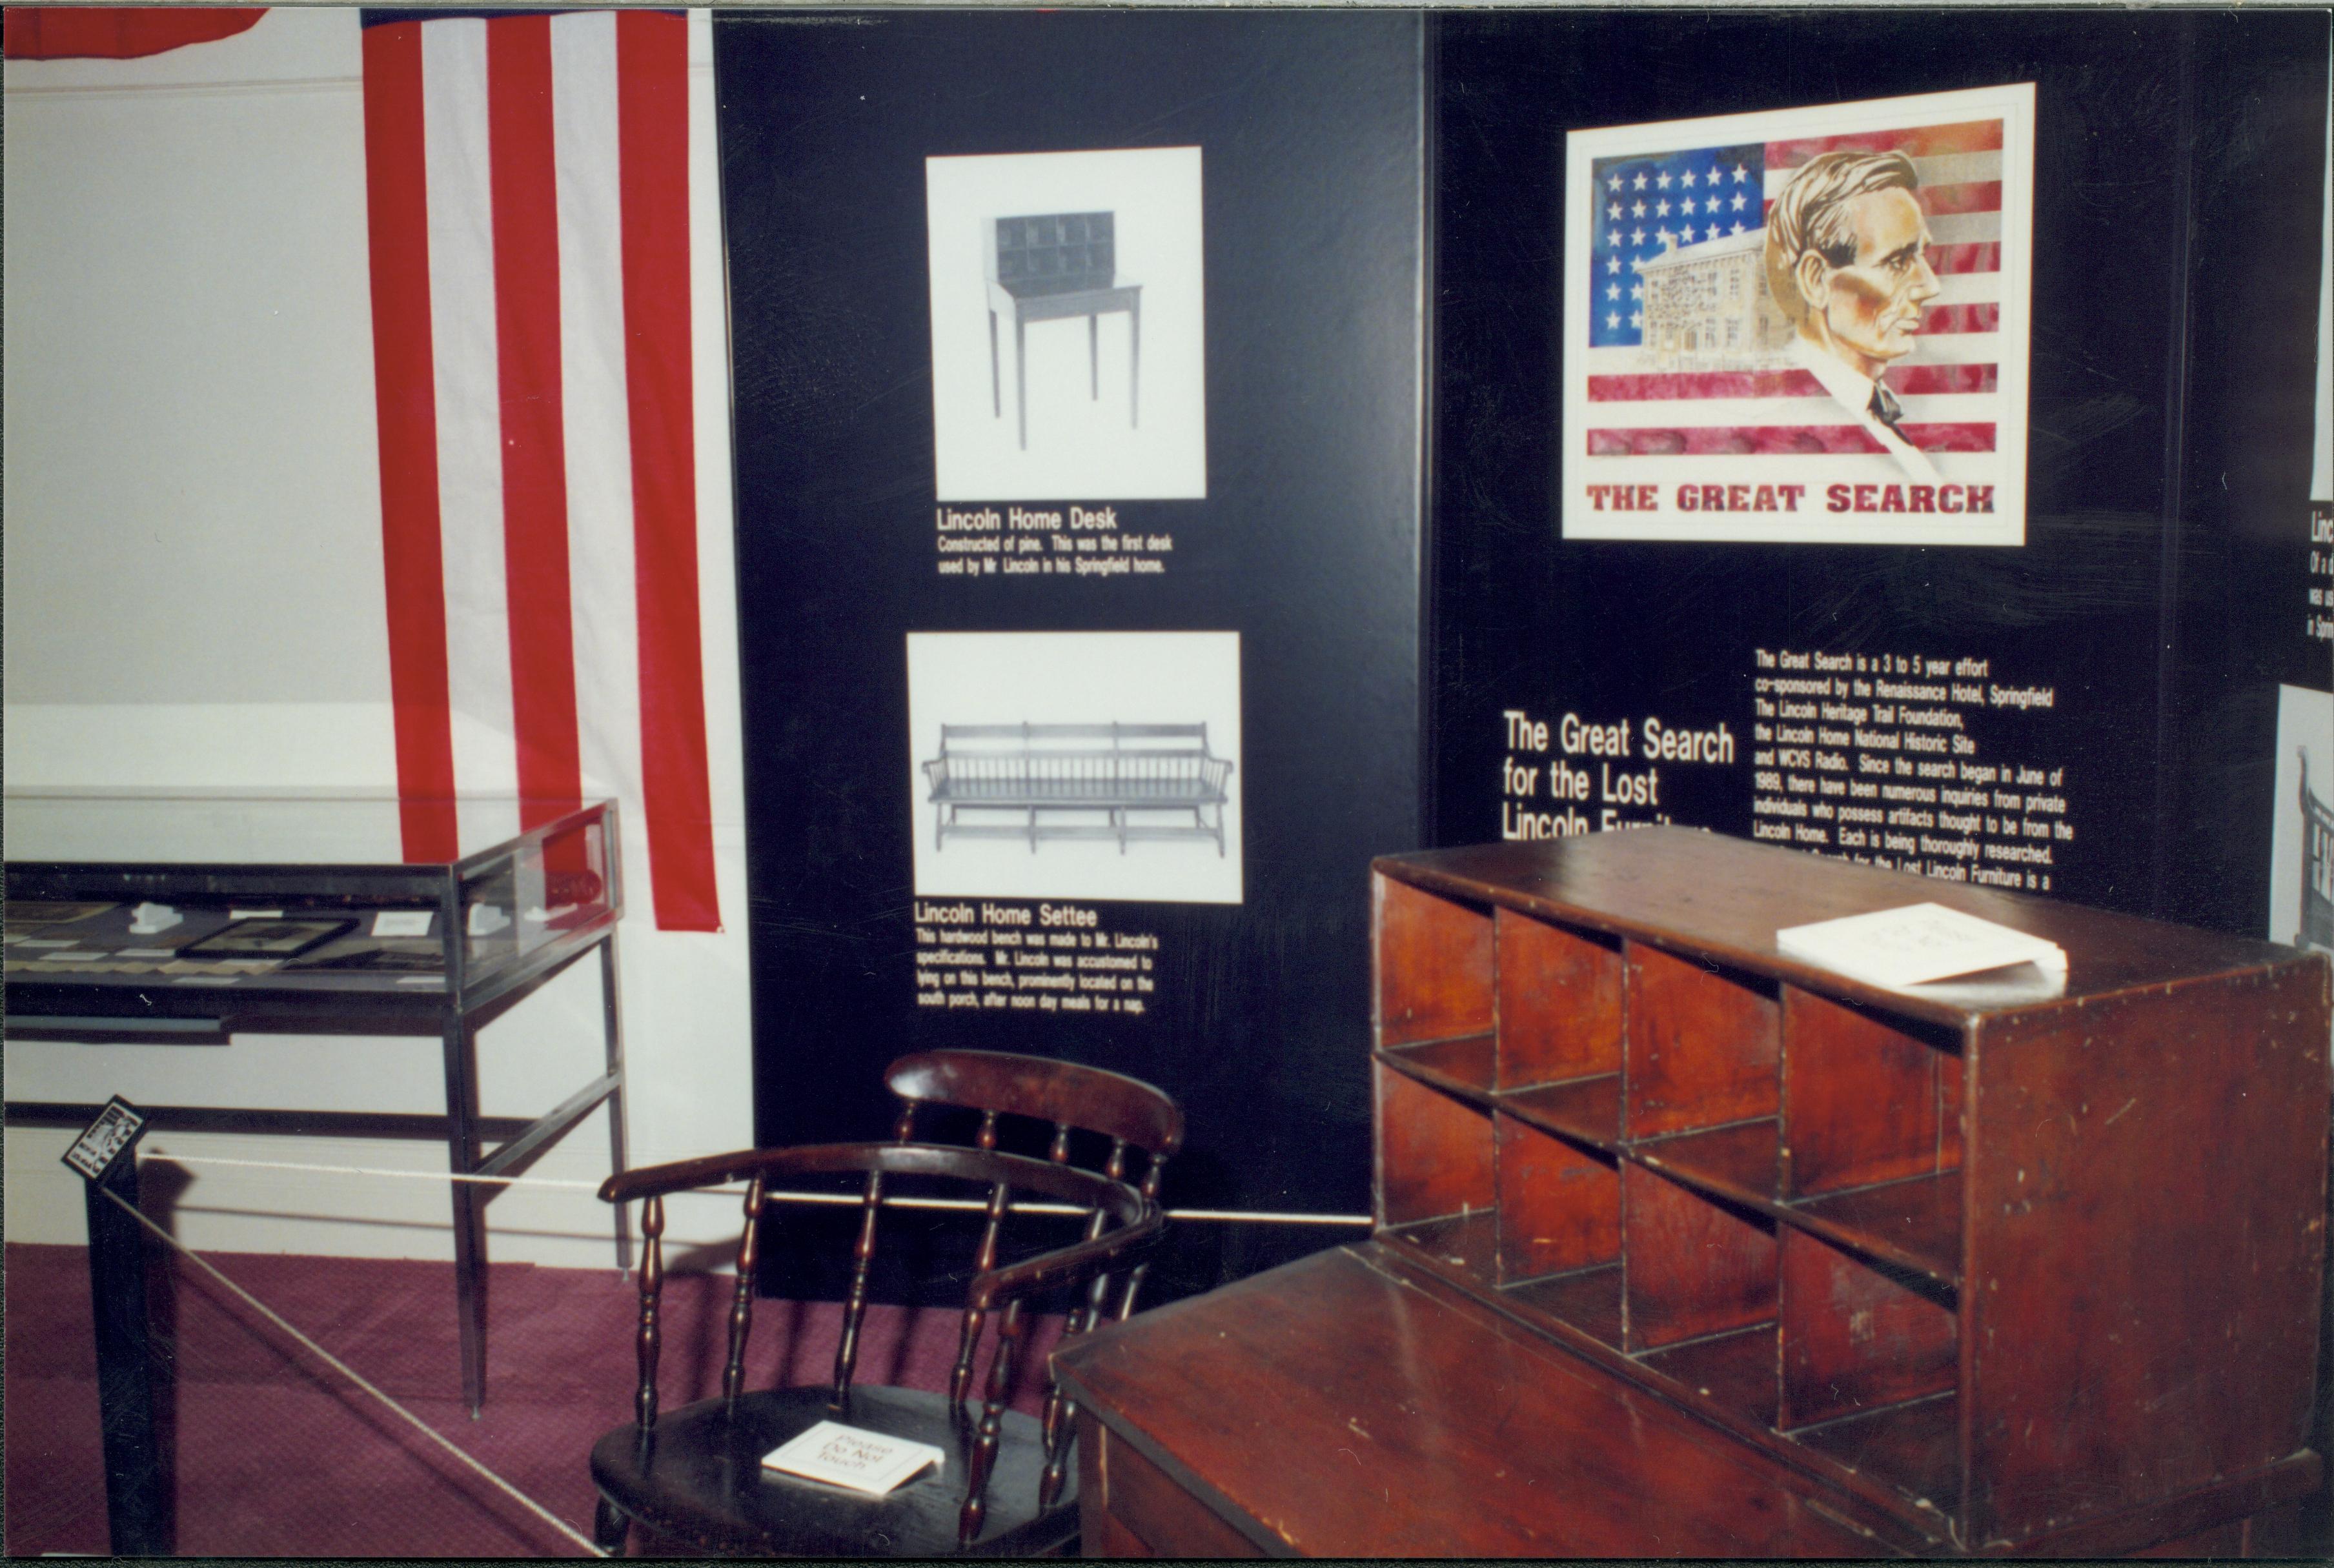 NA Lincoln Home NHS, The Great Search exhibit, furnishings, desk, The Great Search